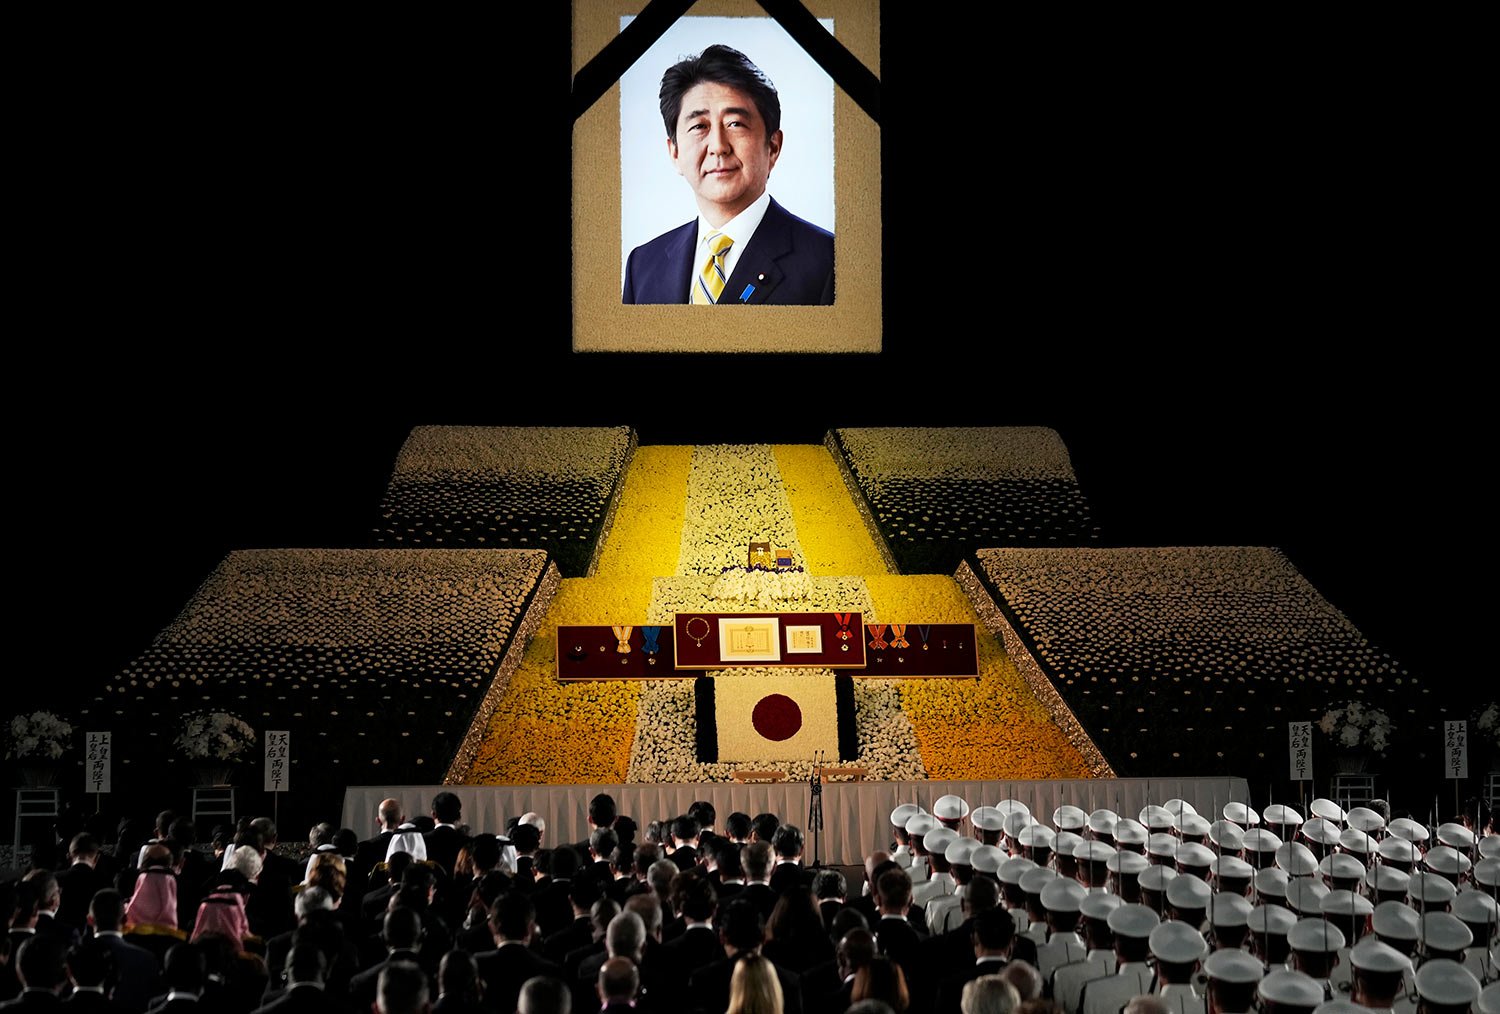  A portrait of former Japanese Prime Minister Shinzo Abe hangs on the stage during his state funeral, Tuesday, Sept. 27, 2022, Tokyo. Abe was assassinated in July. (Franck Robichon/Pool Photo via AP) 